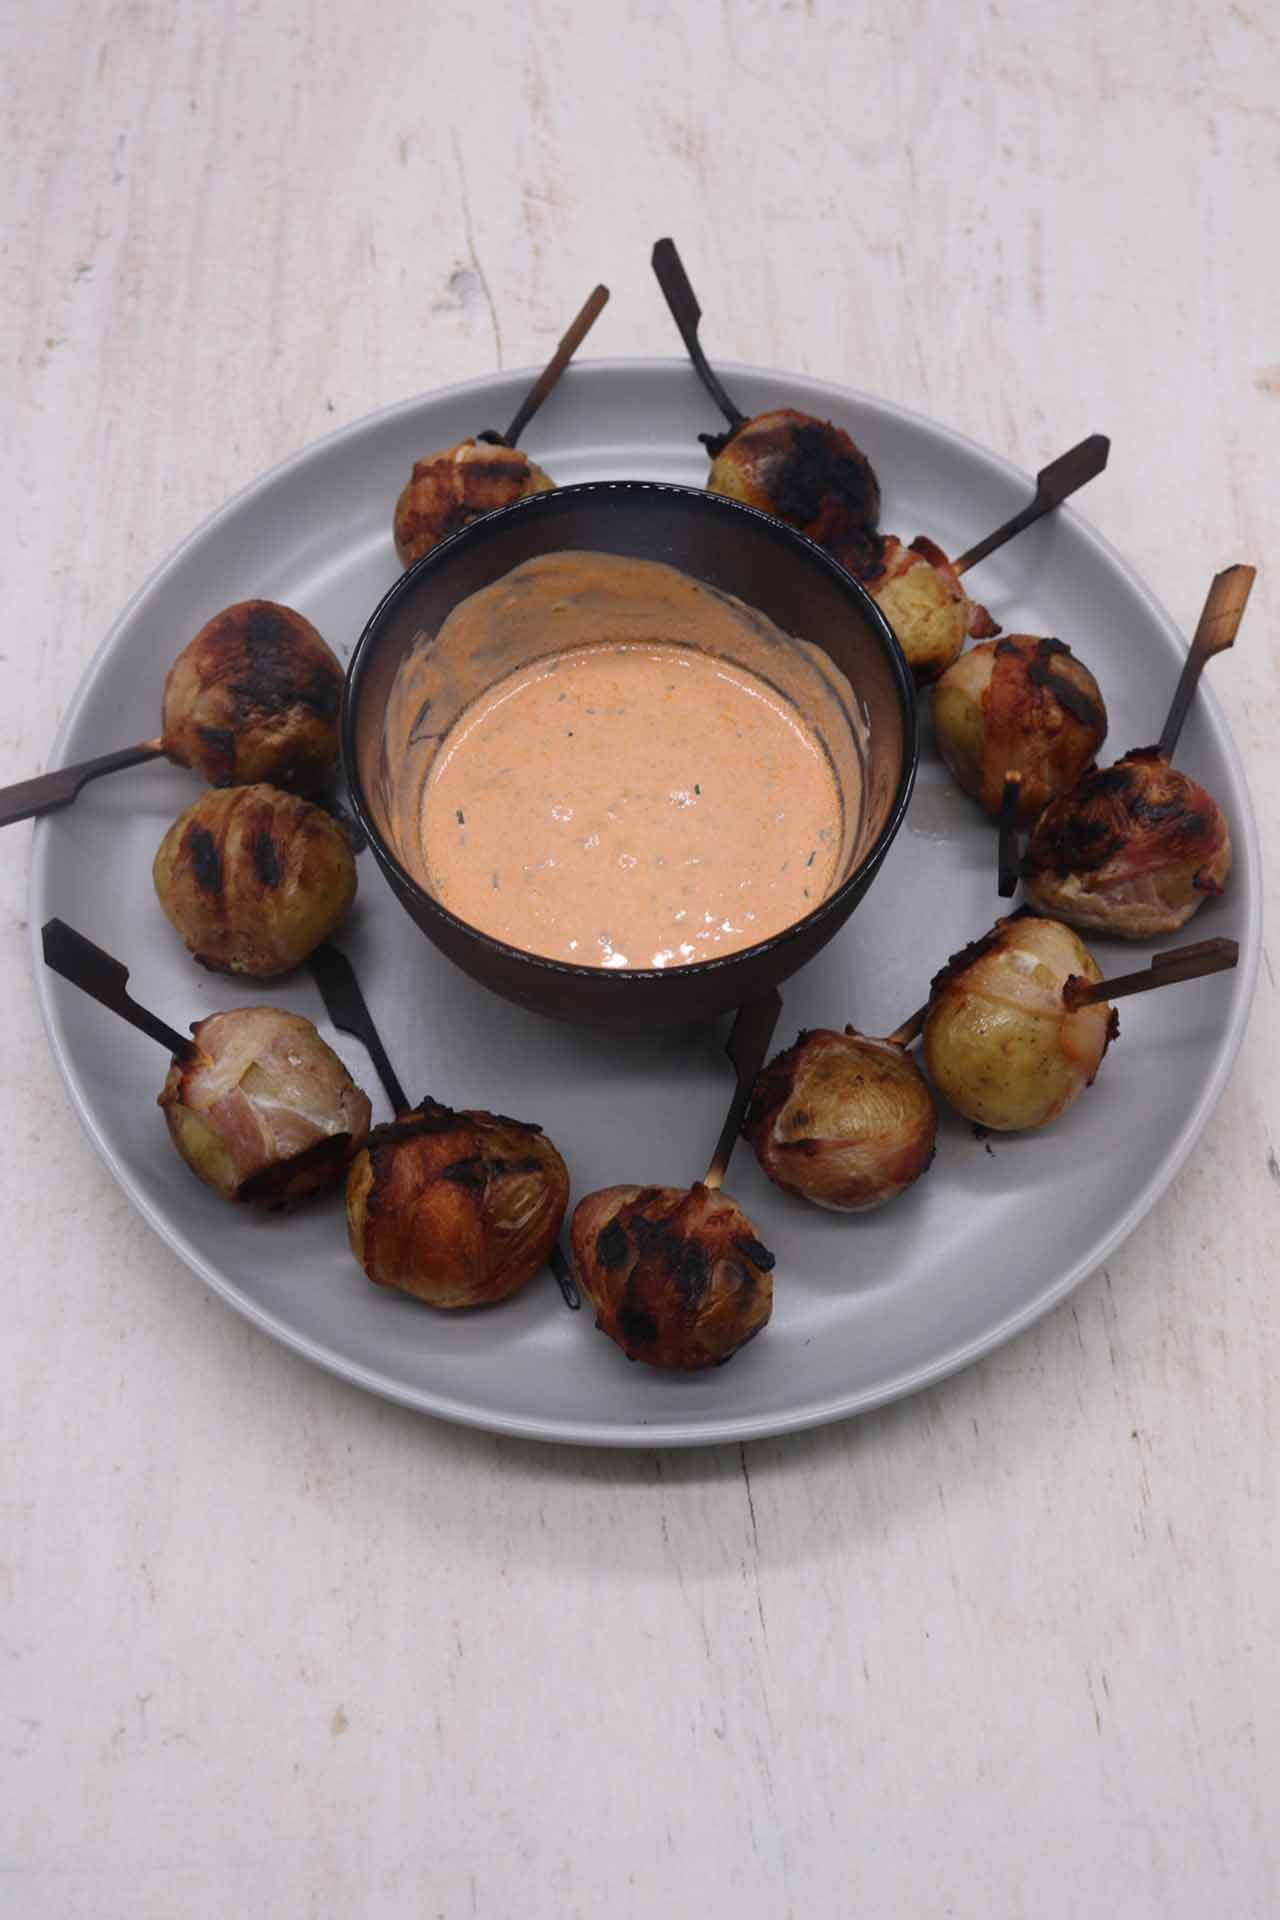 Baby New Potatoes Wrapped in Bacon with Harissa Cheese Dip, Baby New Potatoes Wrapped in Bacon with Harissa Cheese Dip